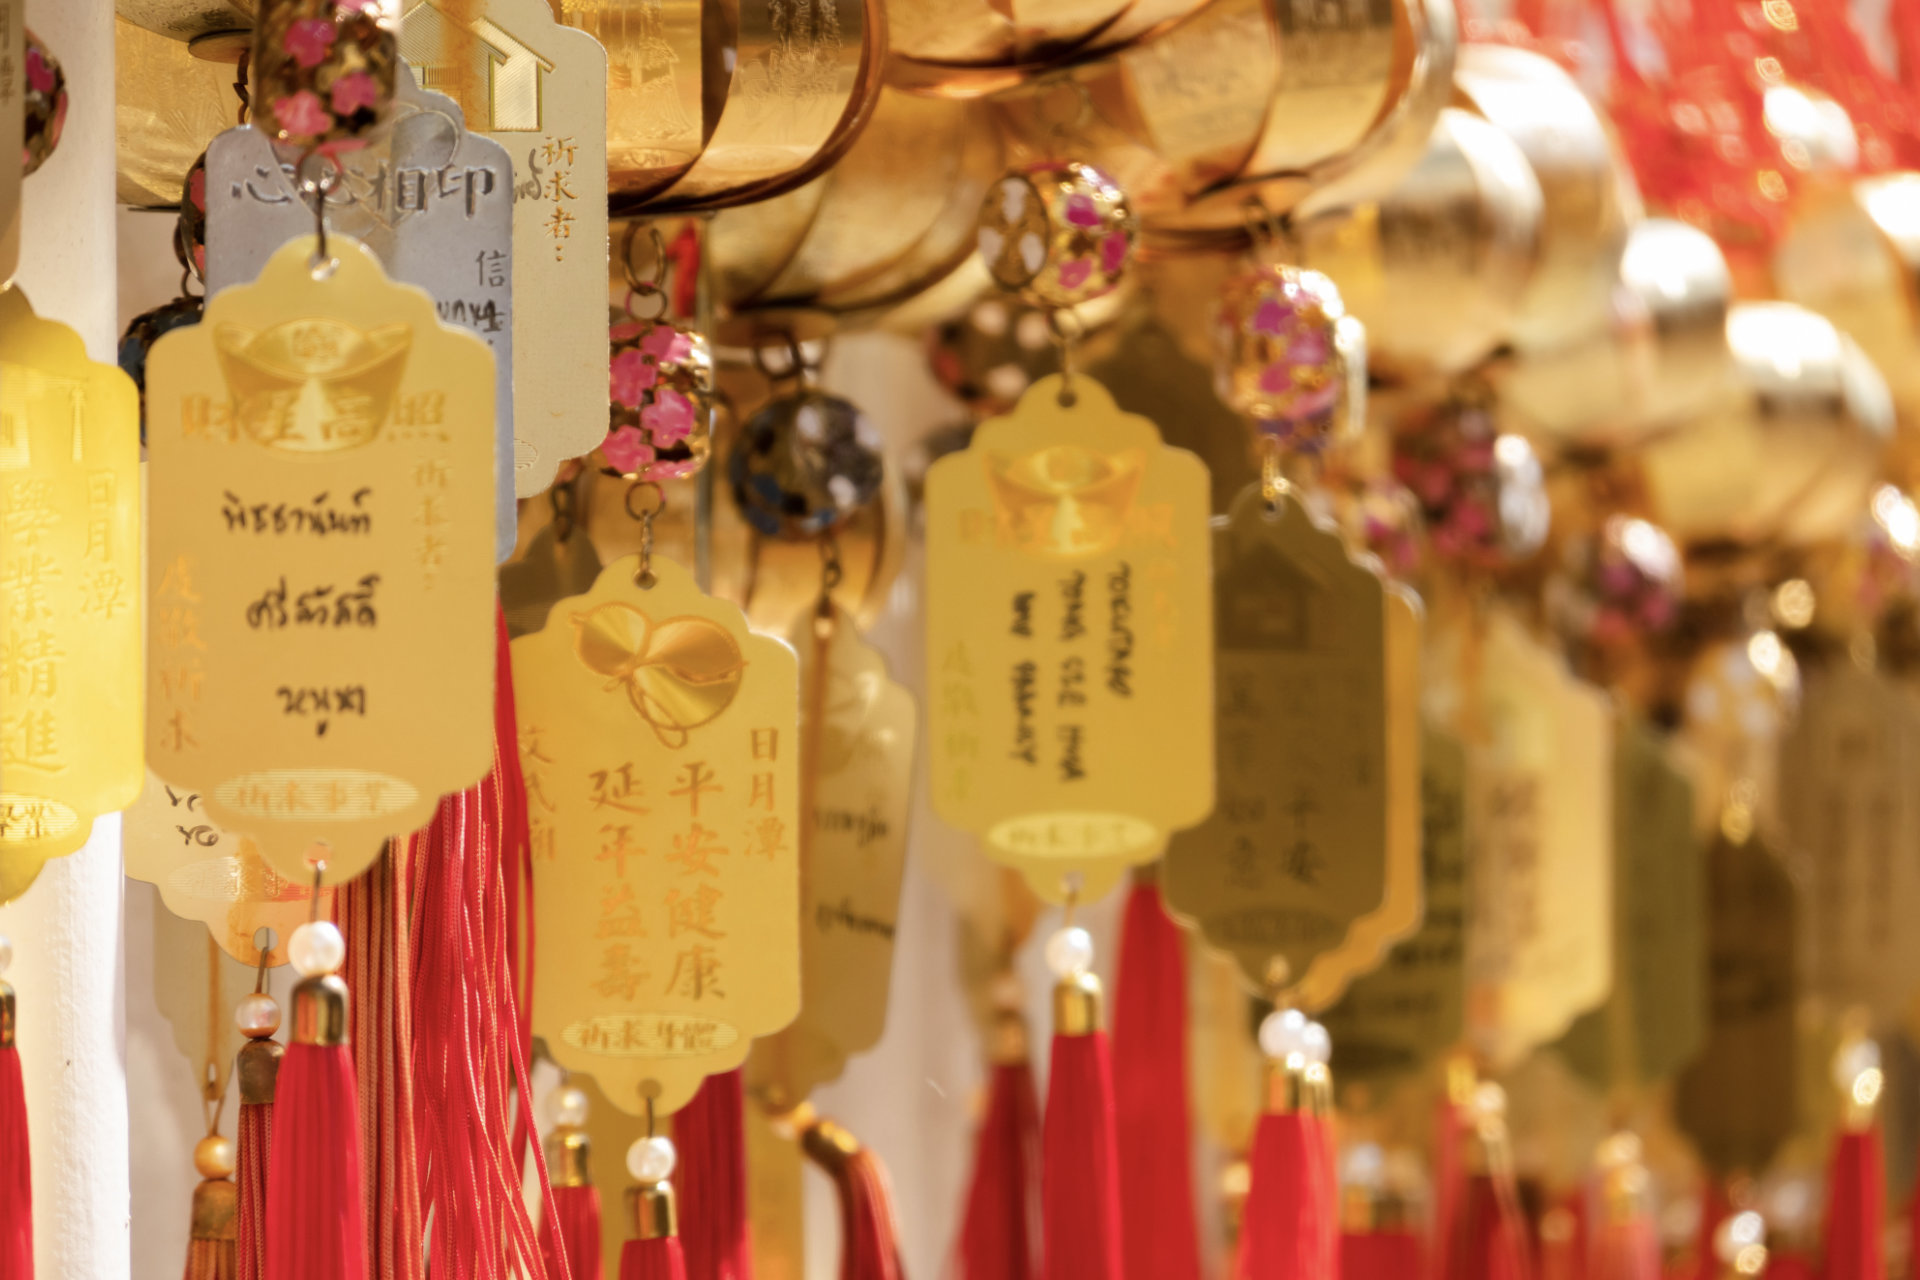 7 Chinese New Year Decorations That Bring Good Luck to Your Home